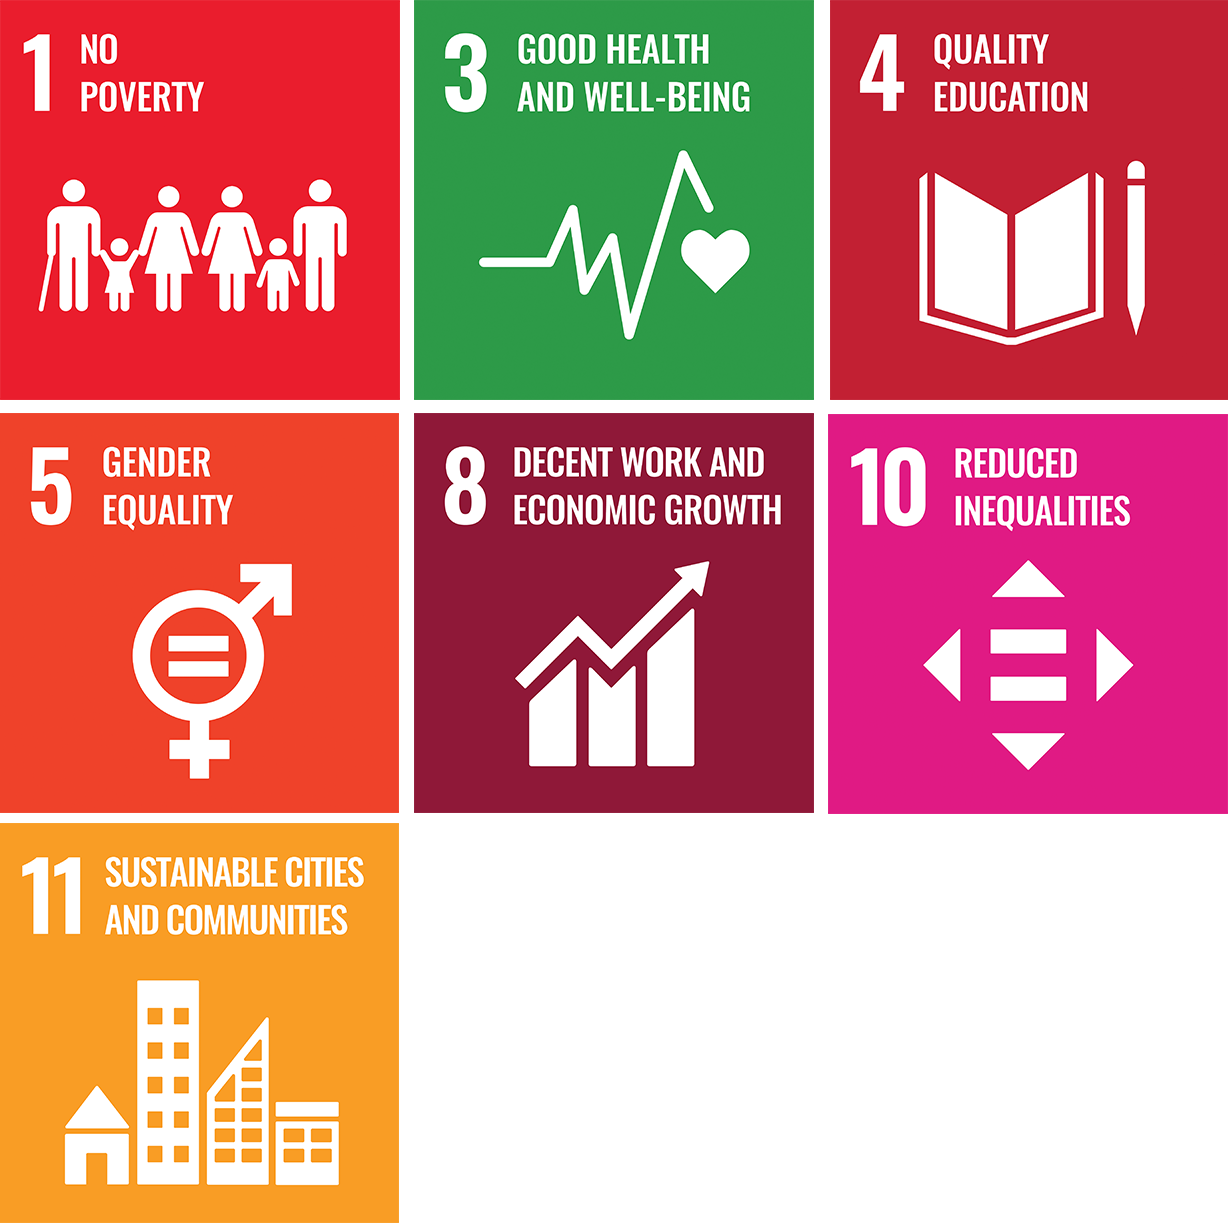 UN Sustainability Development Goals - No Poverty - Good Health and Well Being - Quality Education - Gender Equality - Decent work and economic growth - Reduced Inequalities - Sustainable cities and co